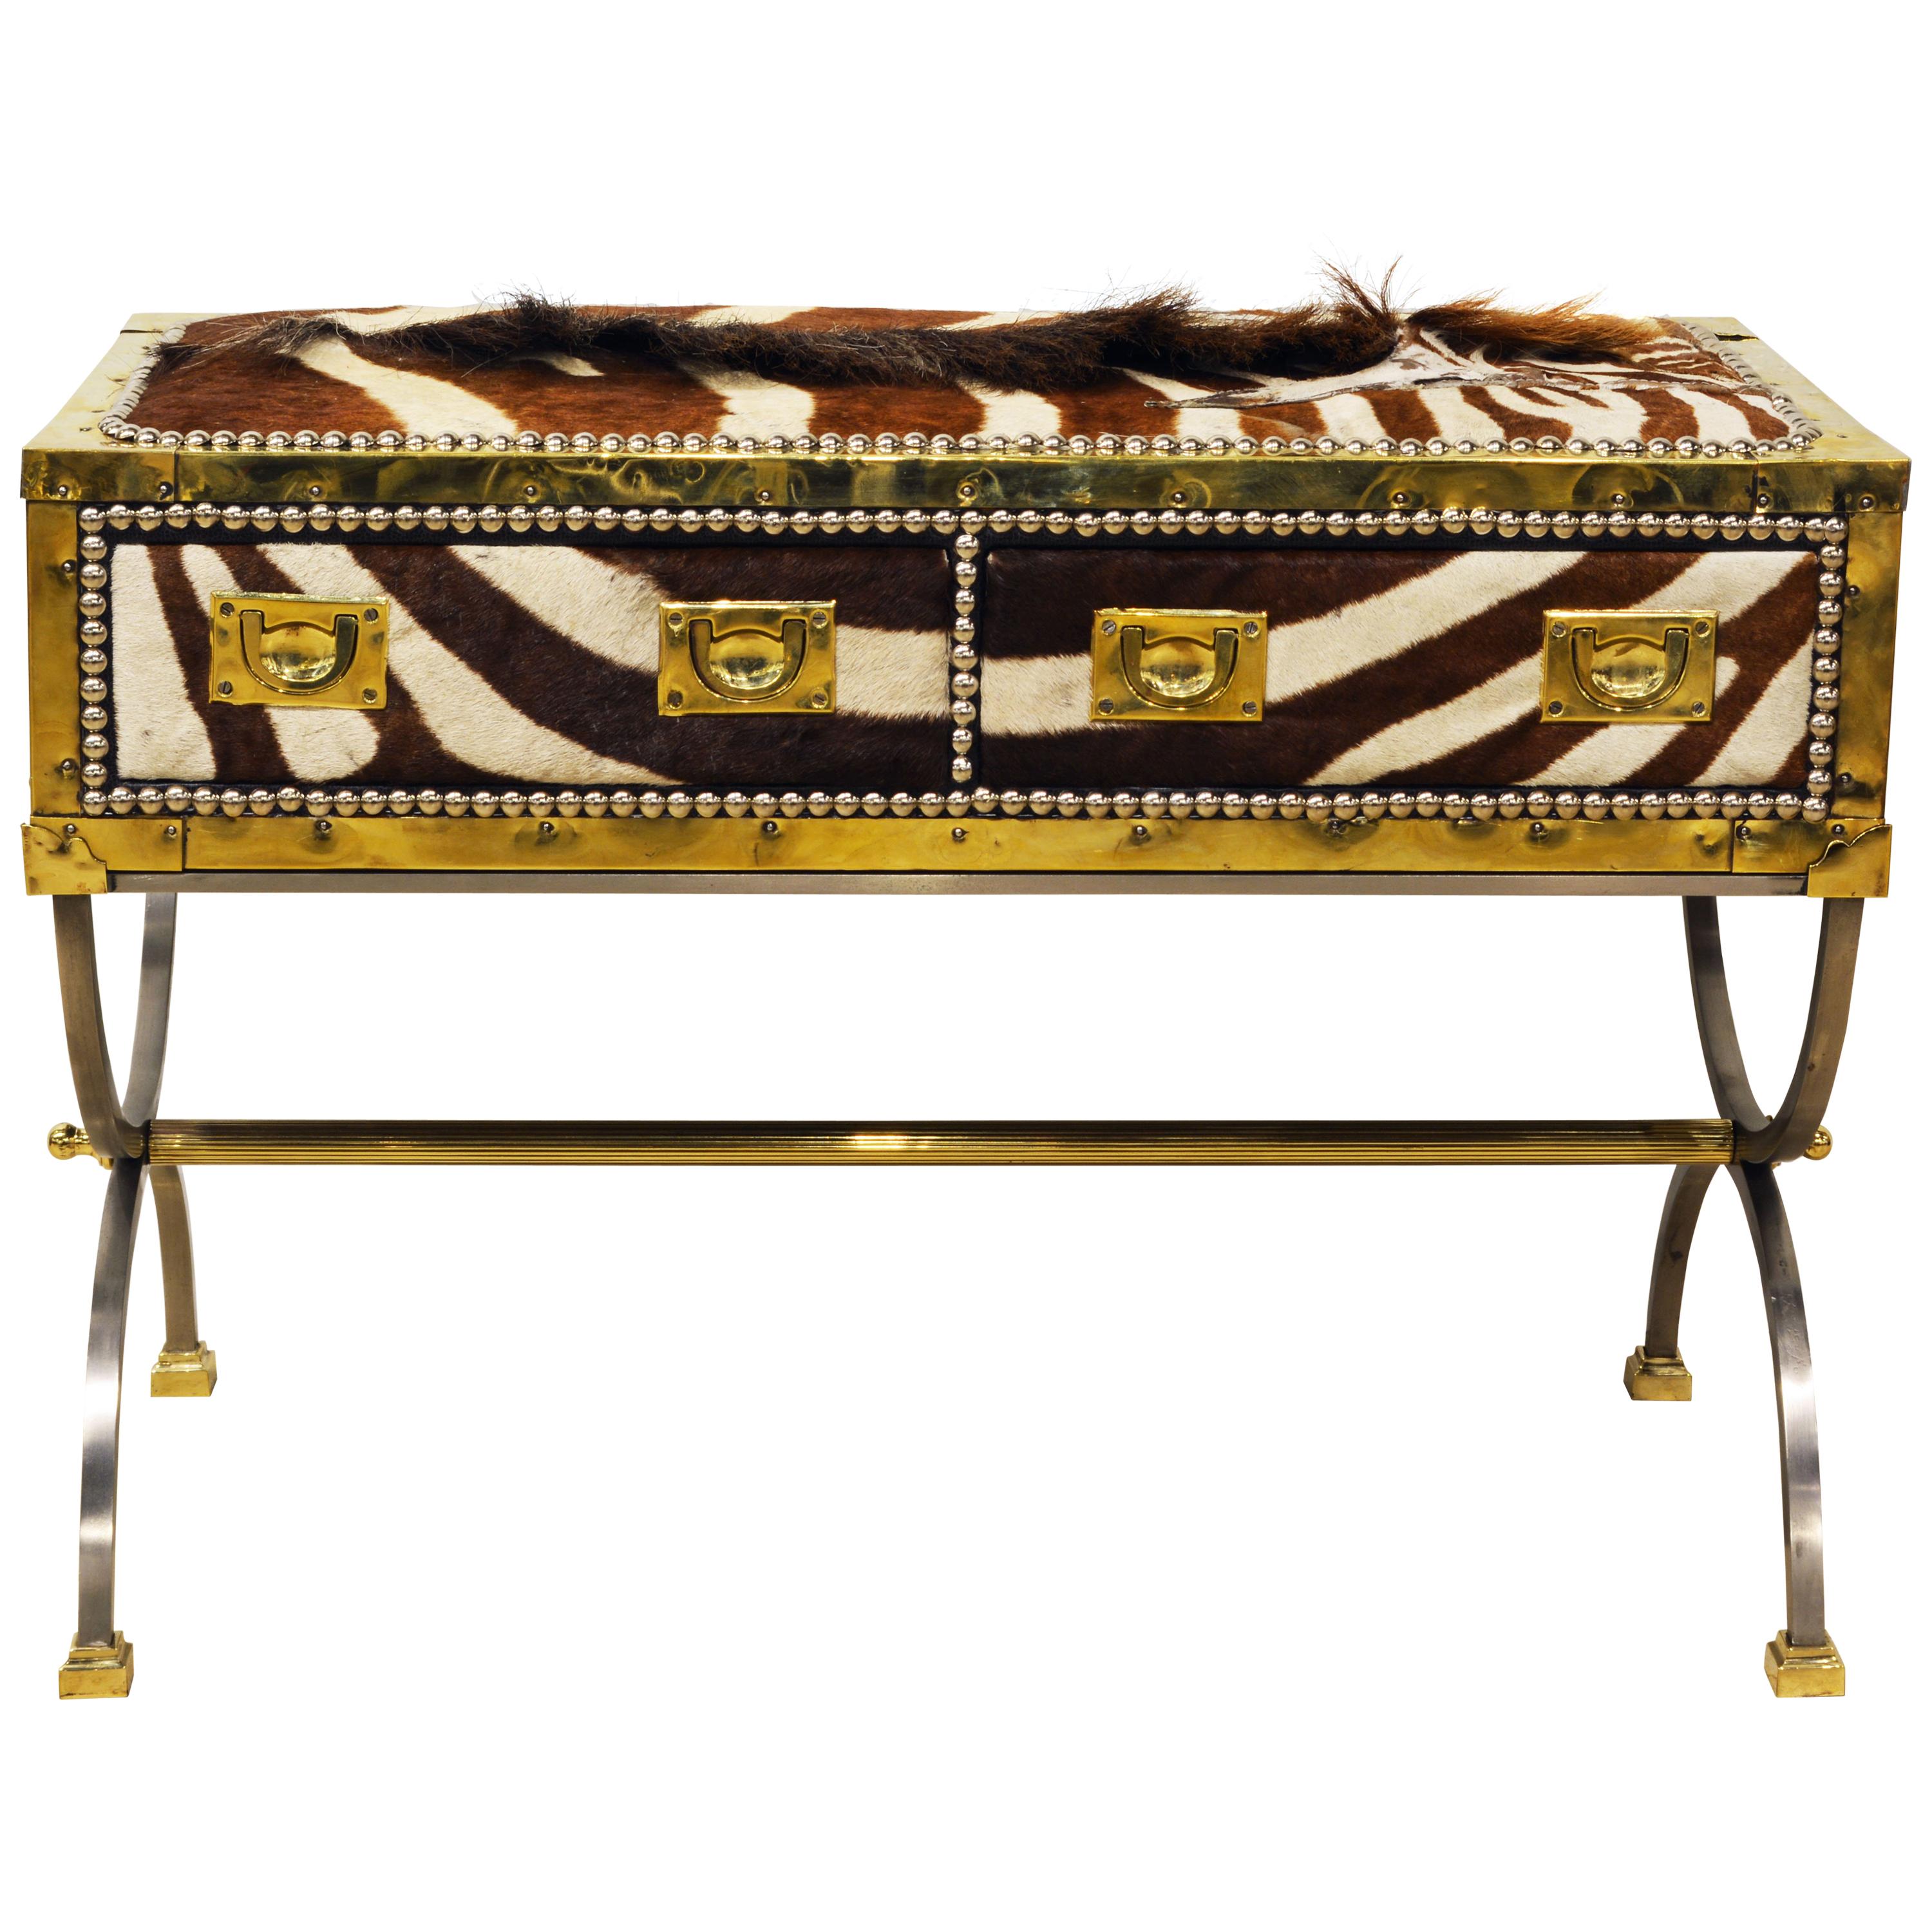 Unique Midcentury French Two-Drawer Zebra Skin Commode on Curule Style Stand